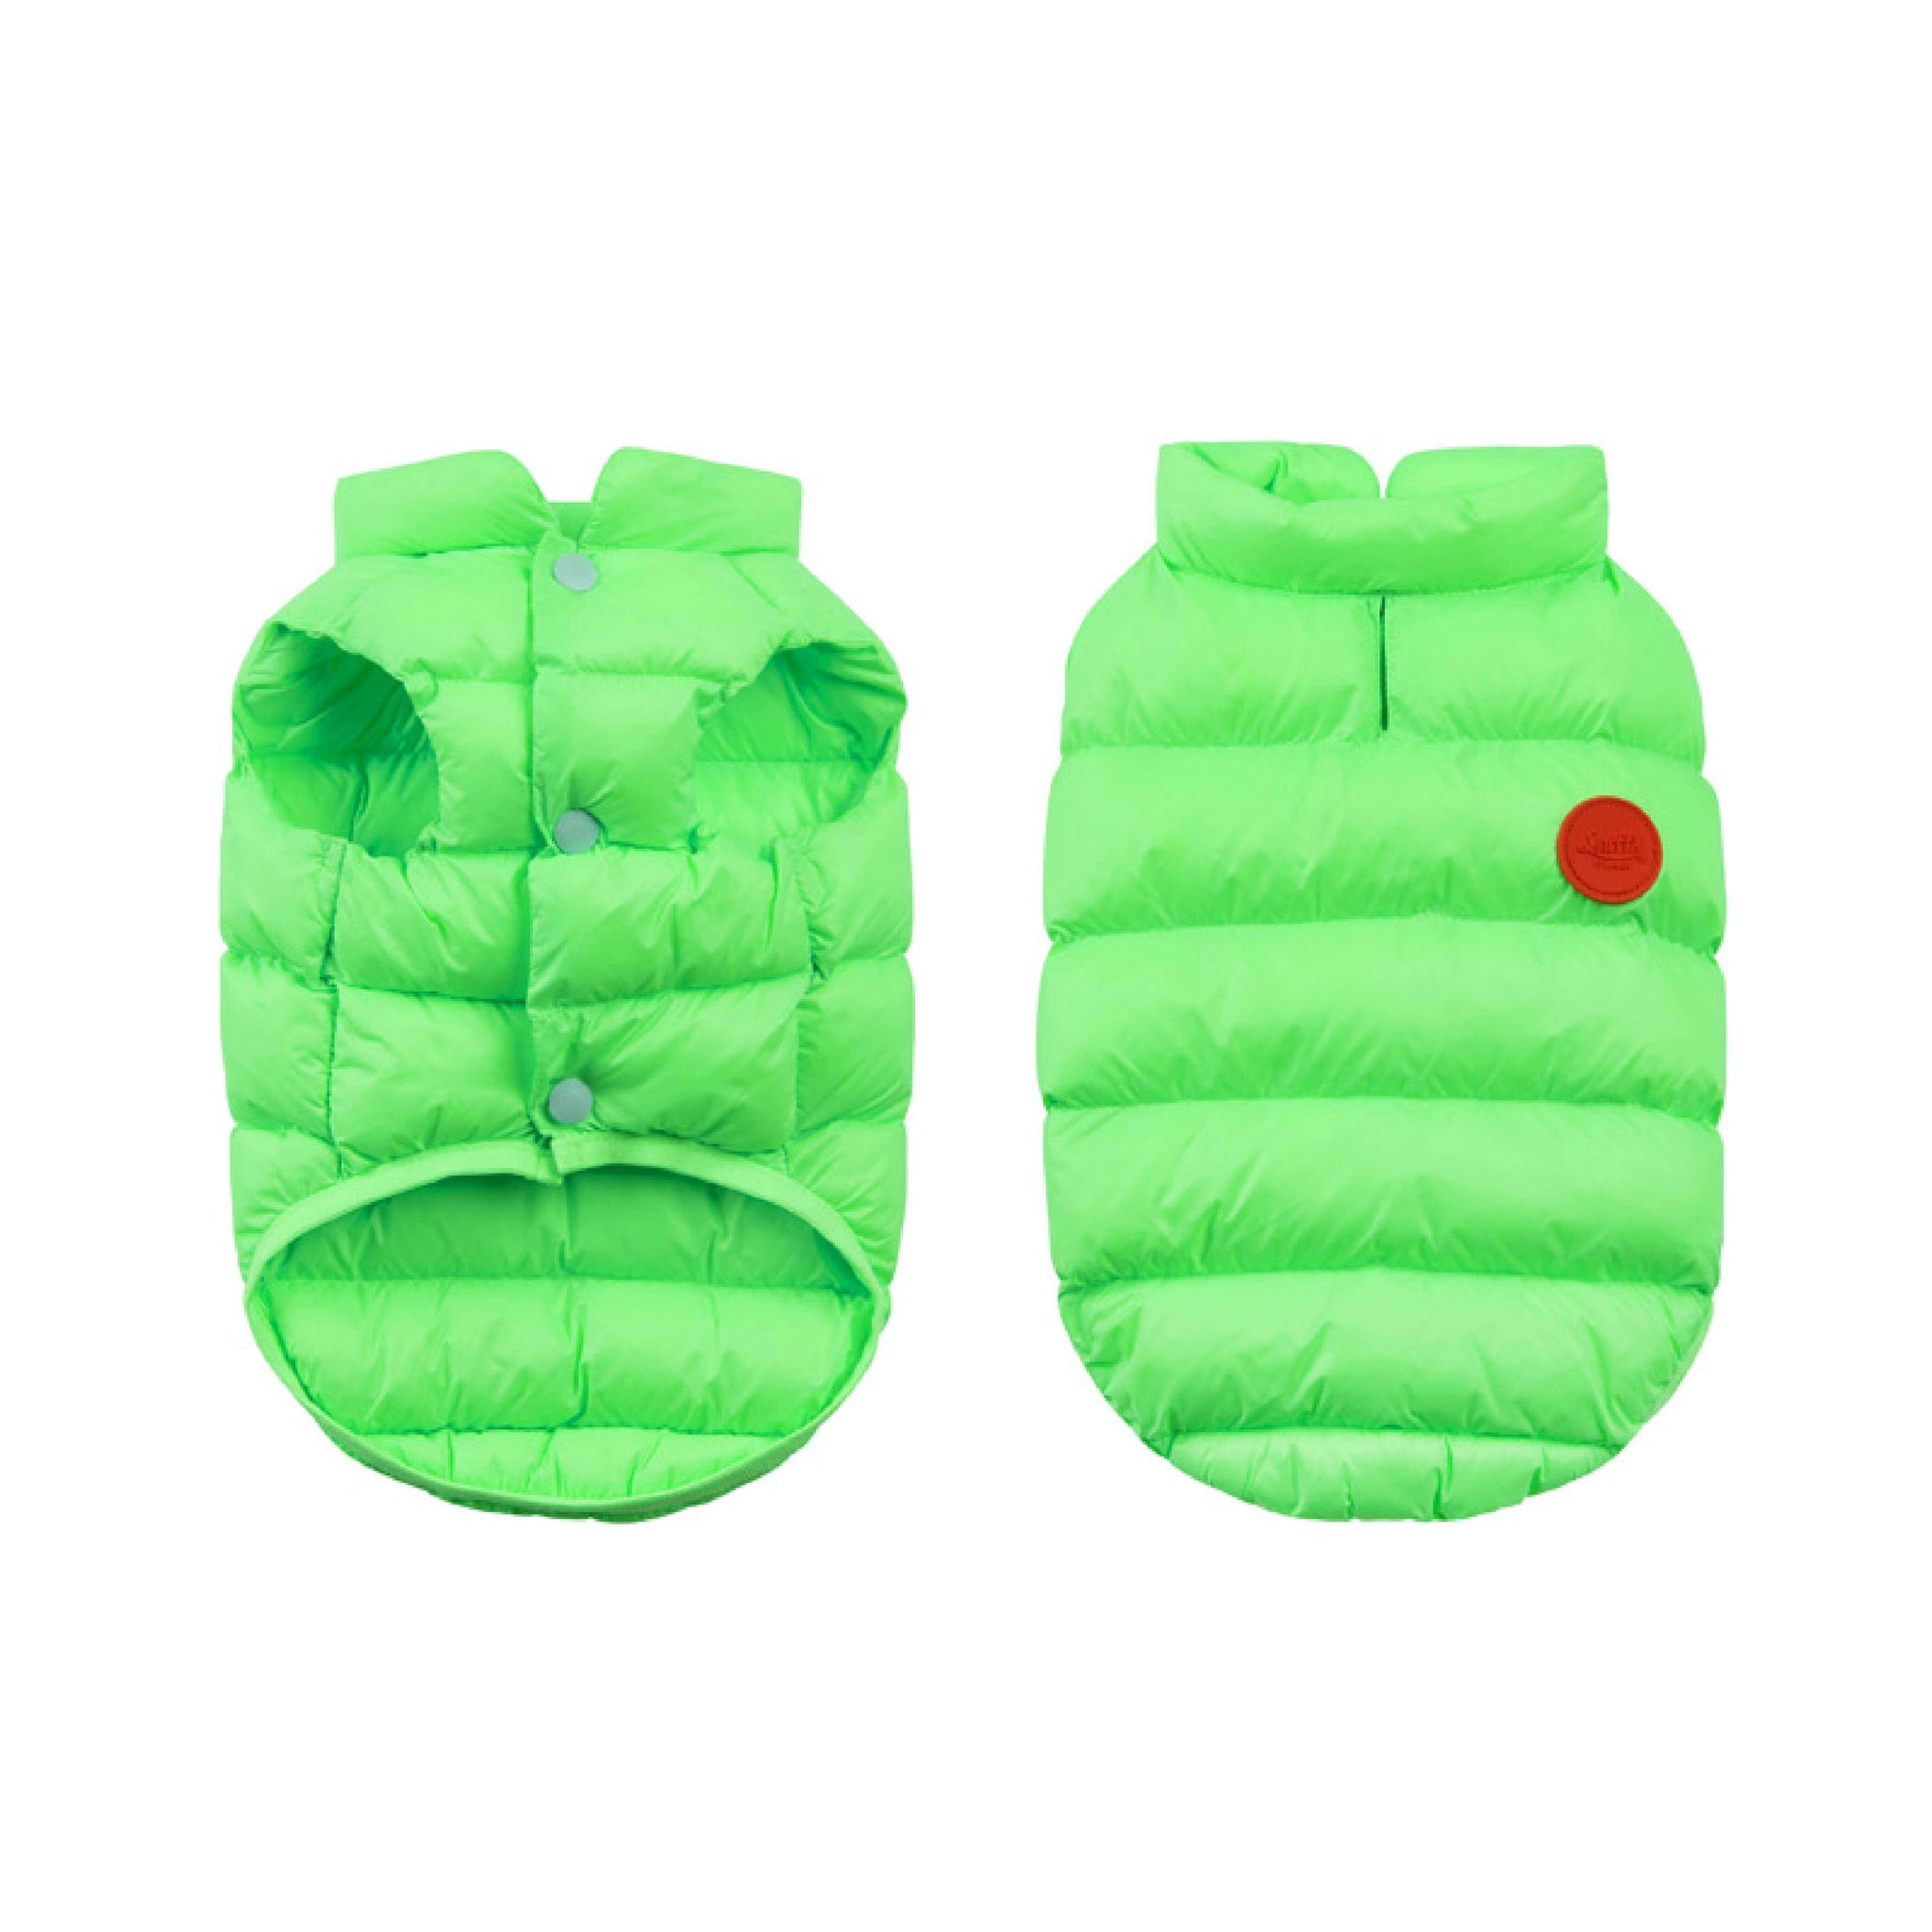 Lightweight, padded vest filled with warm eco-down material.